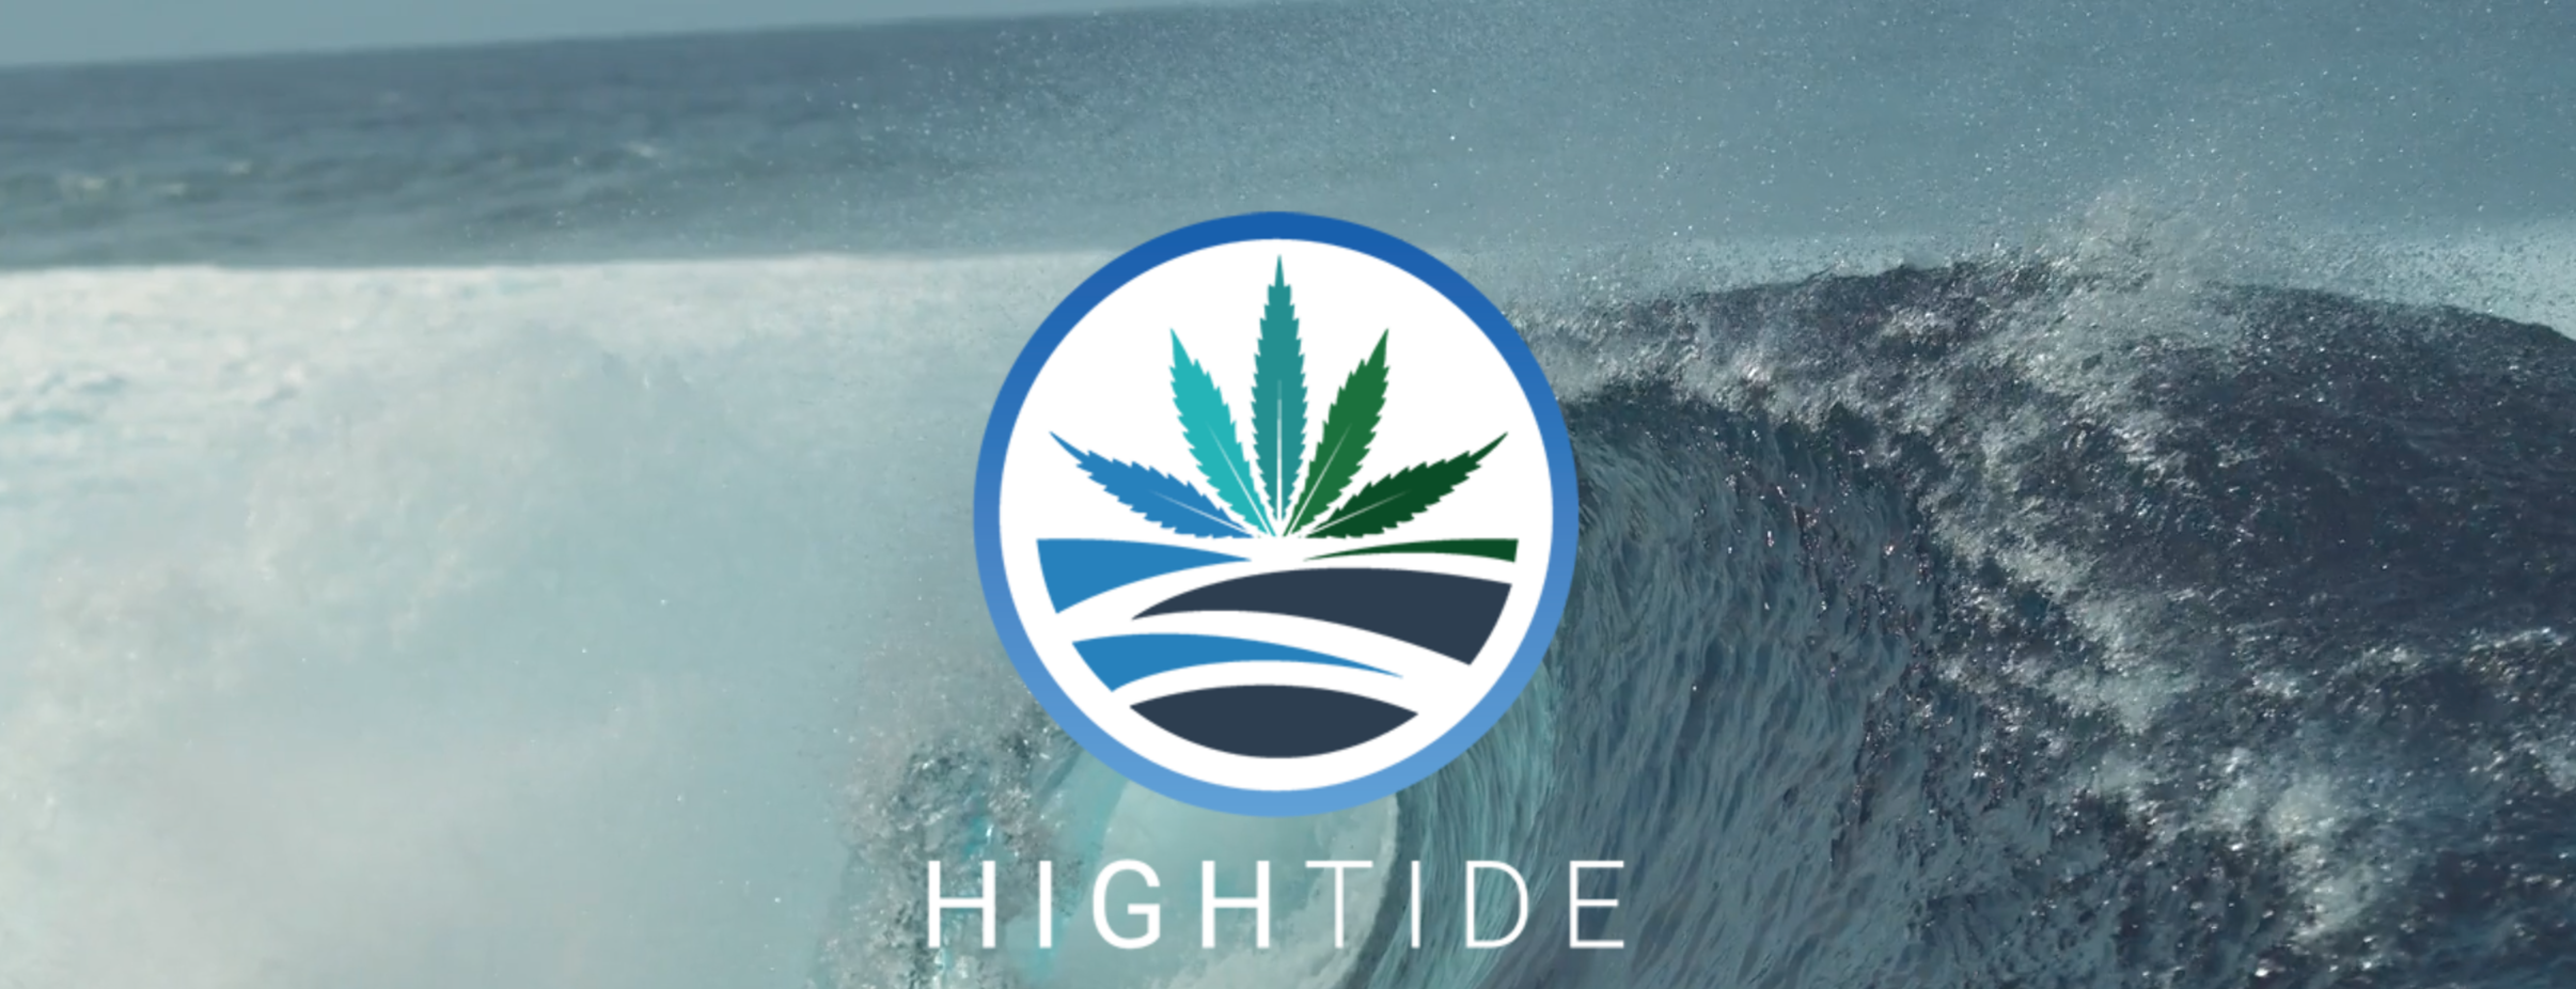 High Tide Launches Store In Calgary, 74th Nationwide